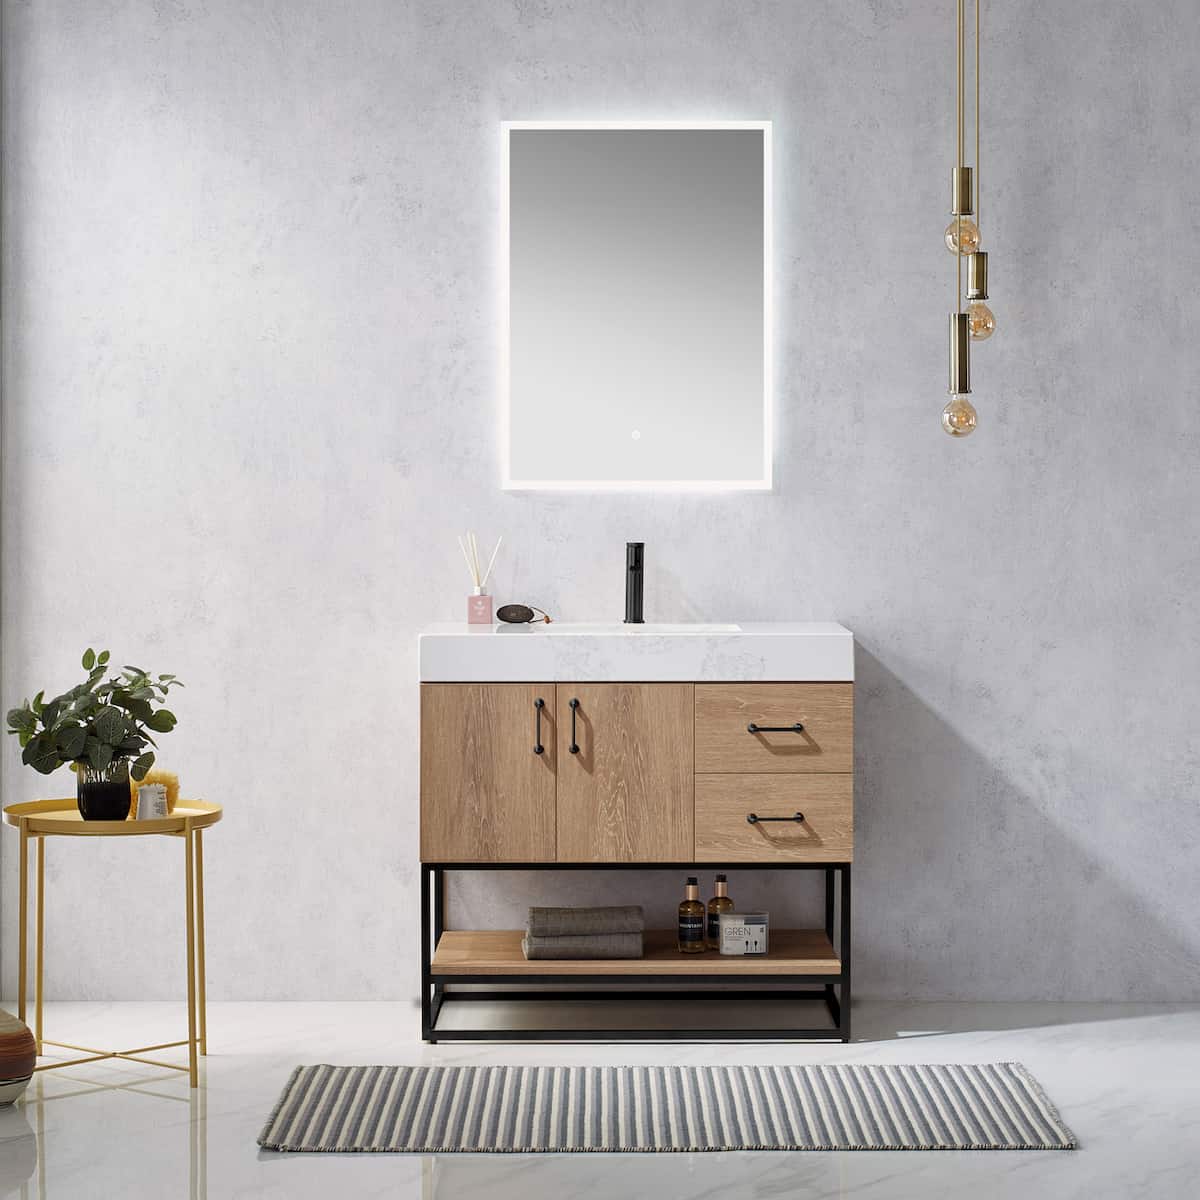 Vinnova Alistair 36 Inch Freestanding Single Vanity in North American Oak and Matte Black Frame with White Grain Stone Countertop With Mirror in Bathroom 789036B-NO-GW